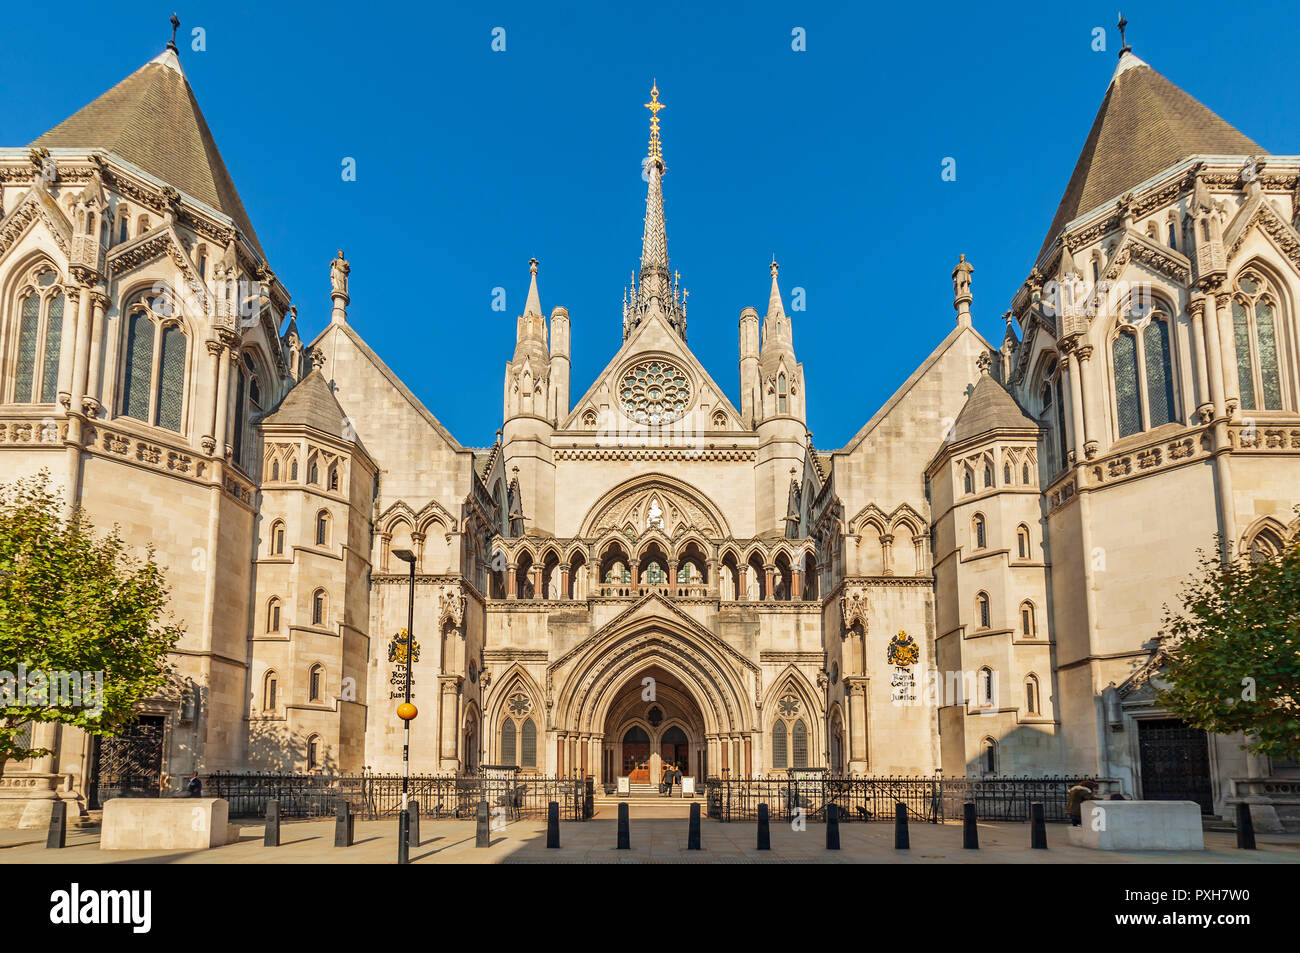 The Royal Courts of Justice, Strand, London. Stock Photo